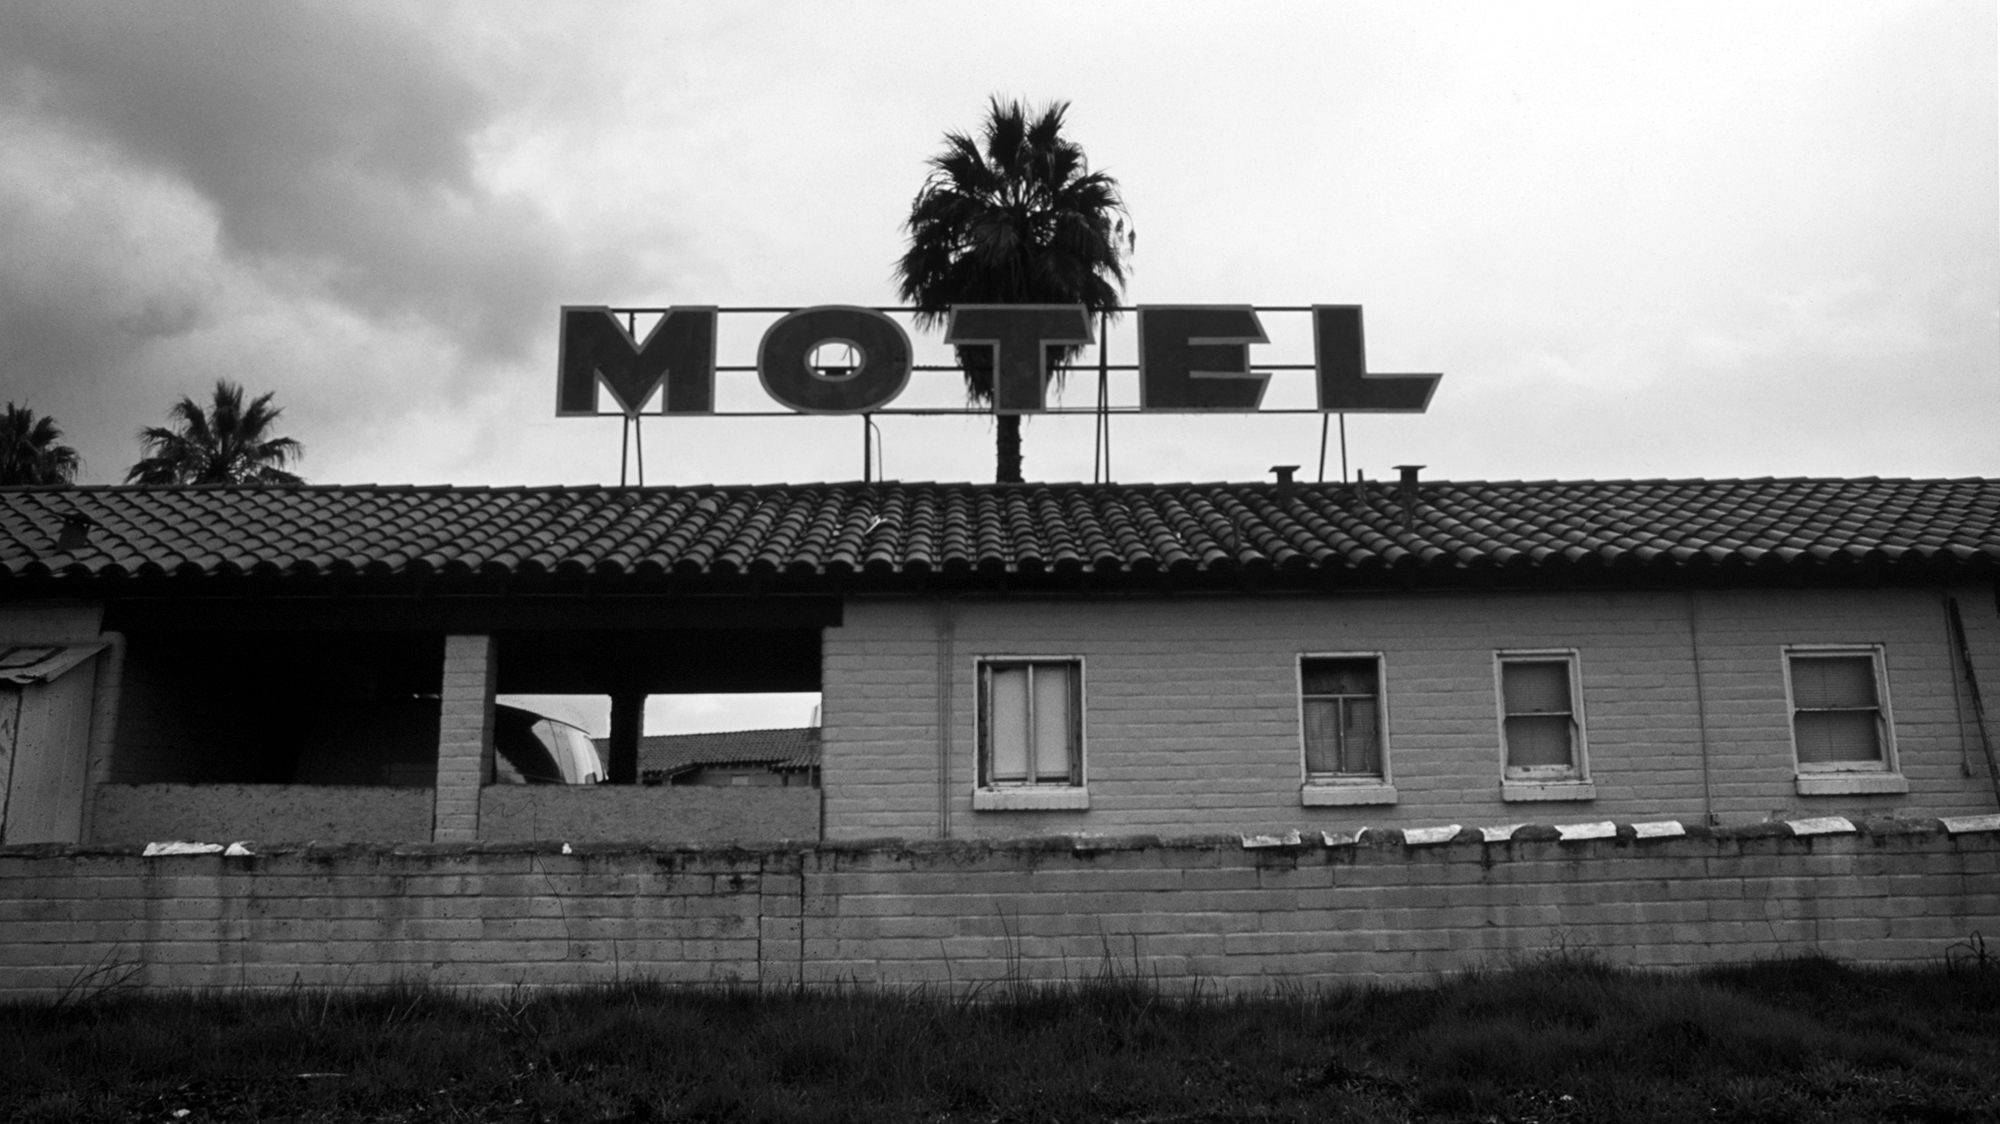 The Casa Grande Motel is located in Madera California. It was once called the Casa Grande Hotel and celebrities like Henry Fonda were known to stay there. Photo taken between 1999-2010. 